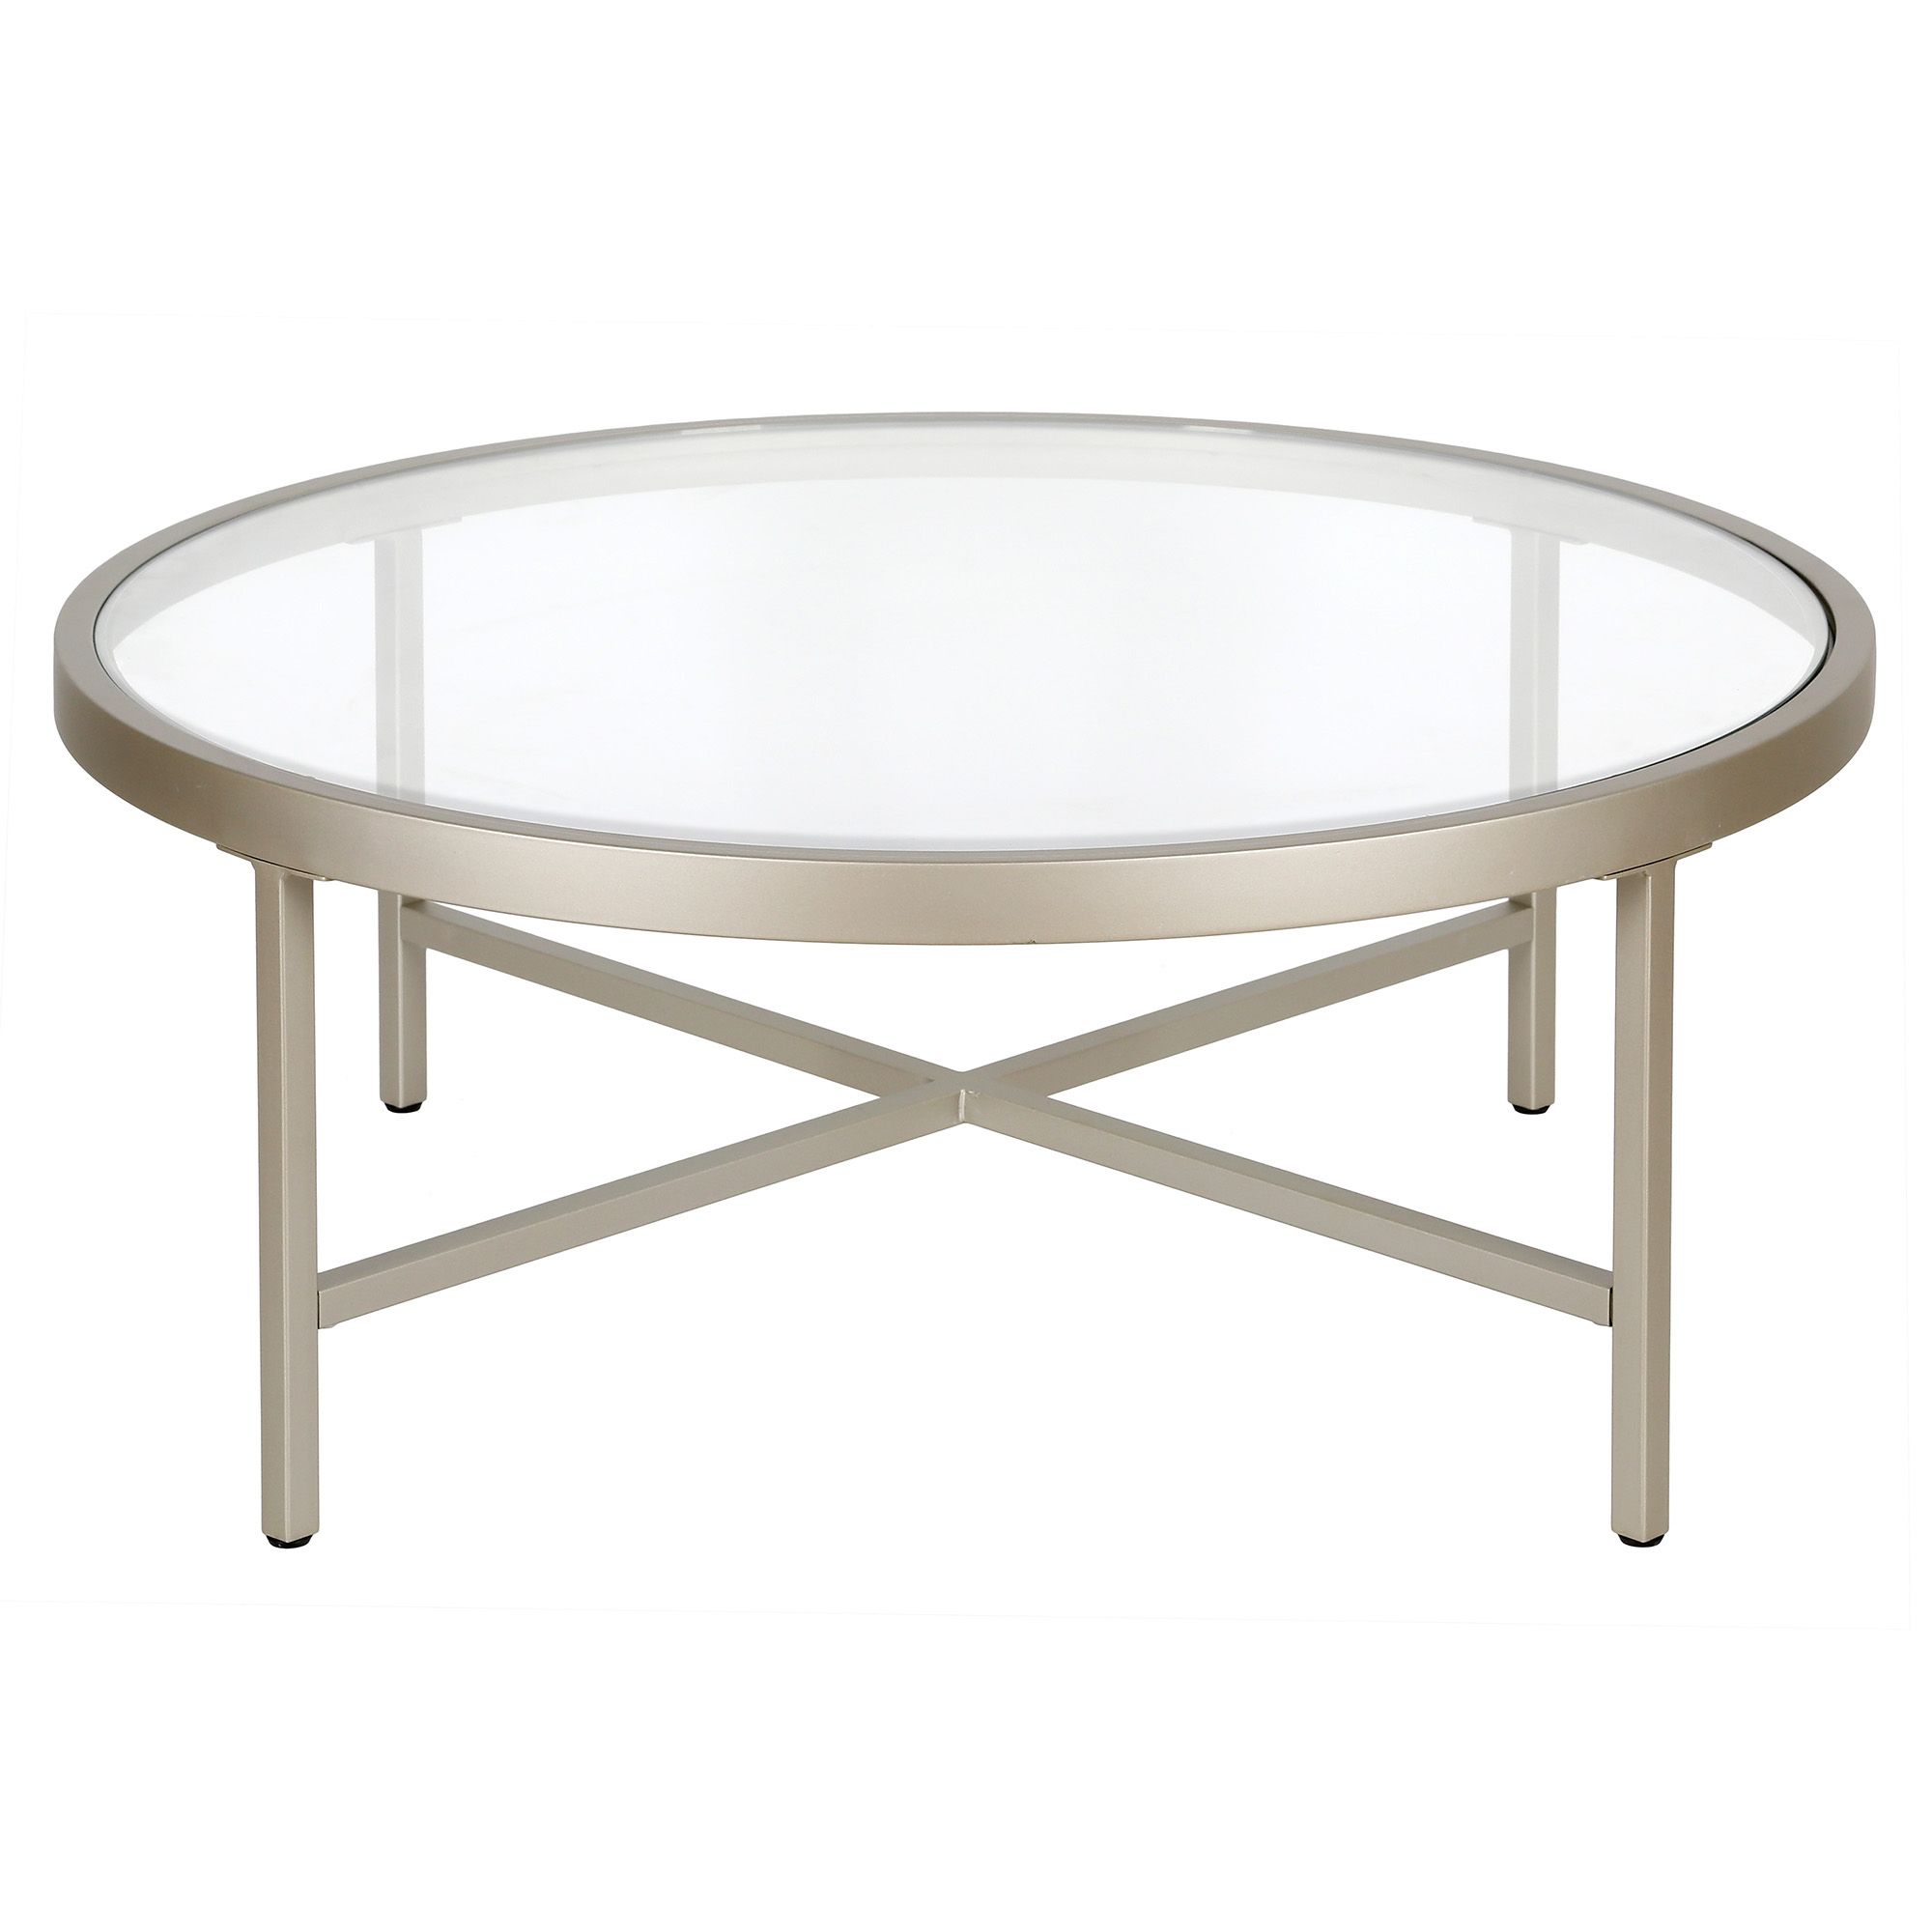 Evelyn&zoe Contemporary Round Coffee Table With Glass Top Within Geometric Glass Modern Coffee Tables (View 11 of 15)